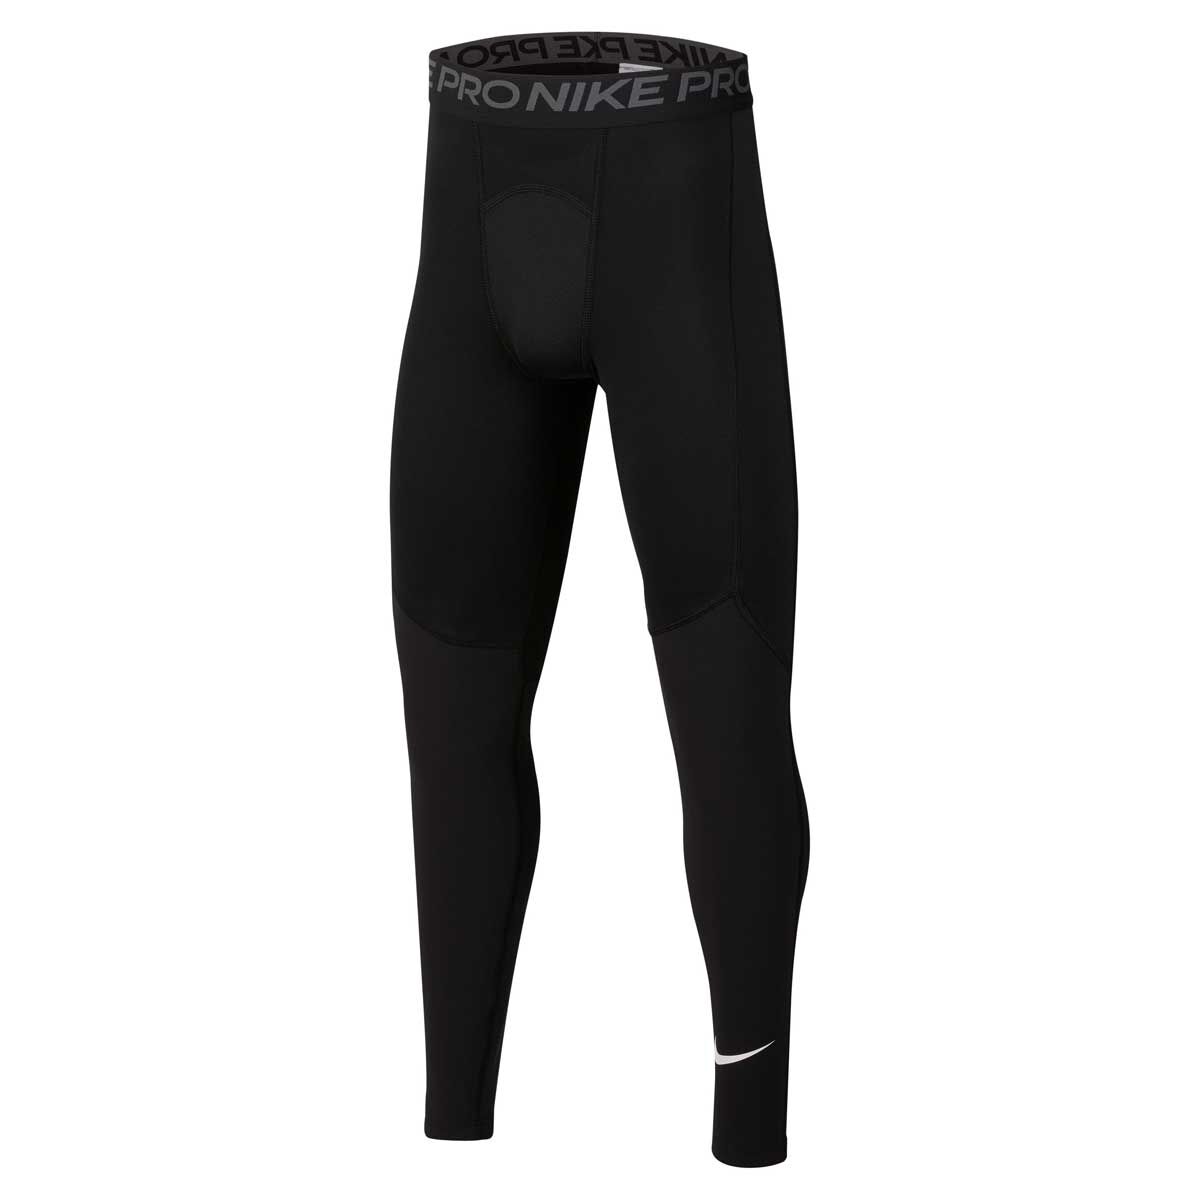 NIKE PRO COMBAT HYPERCOOL SPEED COMPRESSION $65